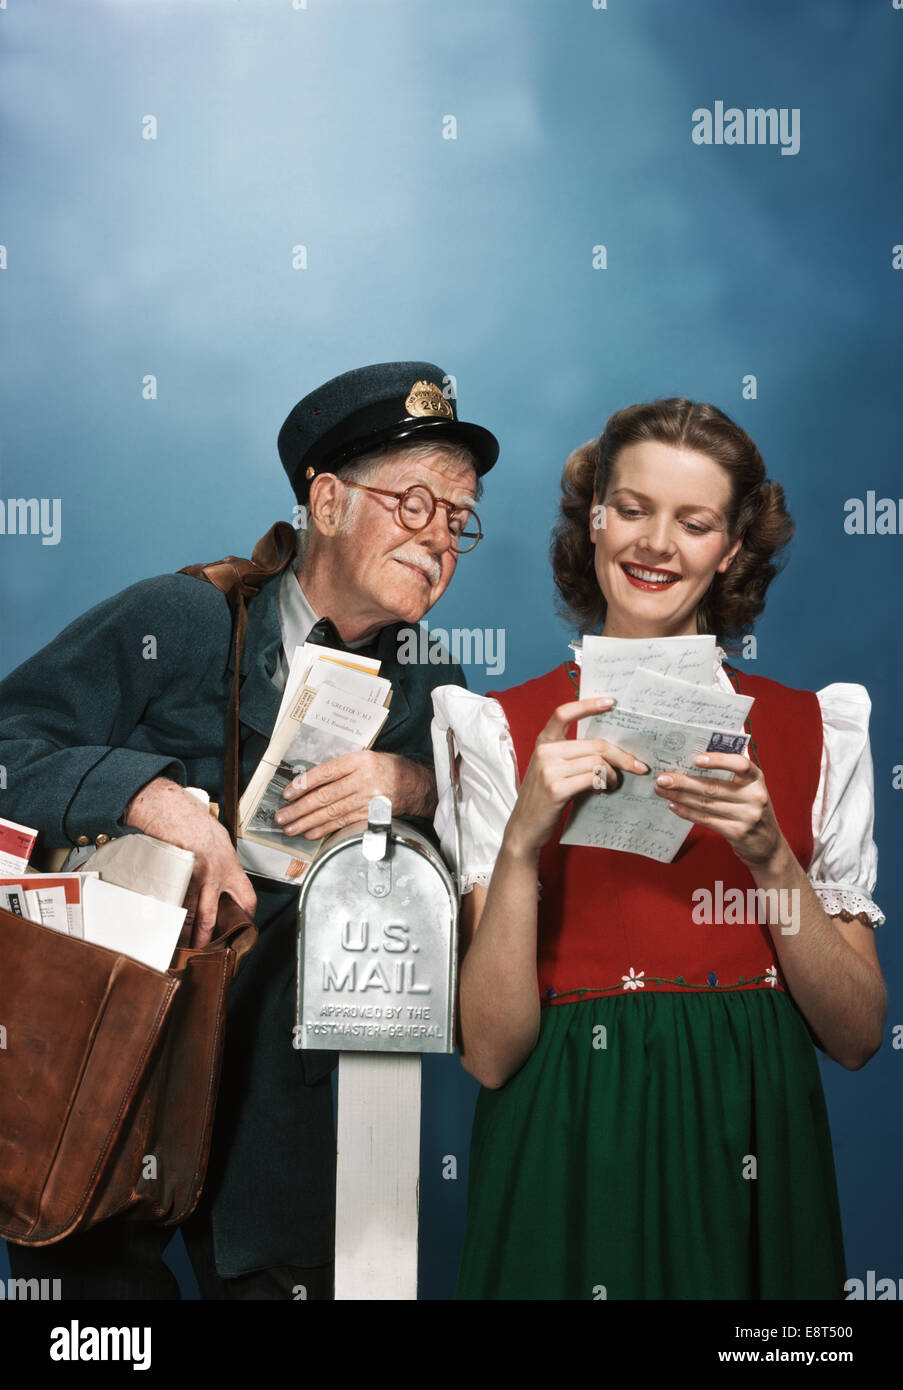 1940s SMILING WOMAN READING LETTERS LEANING ON MAILBOX ELDERLY SENIOR MAILMAN READING OVER SHOULDER Stock Photo